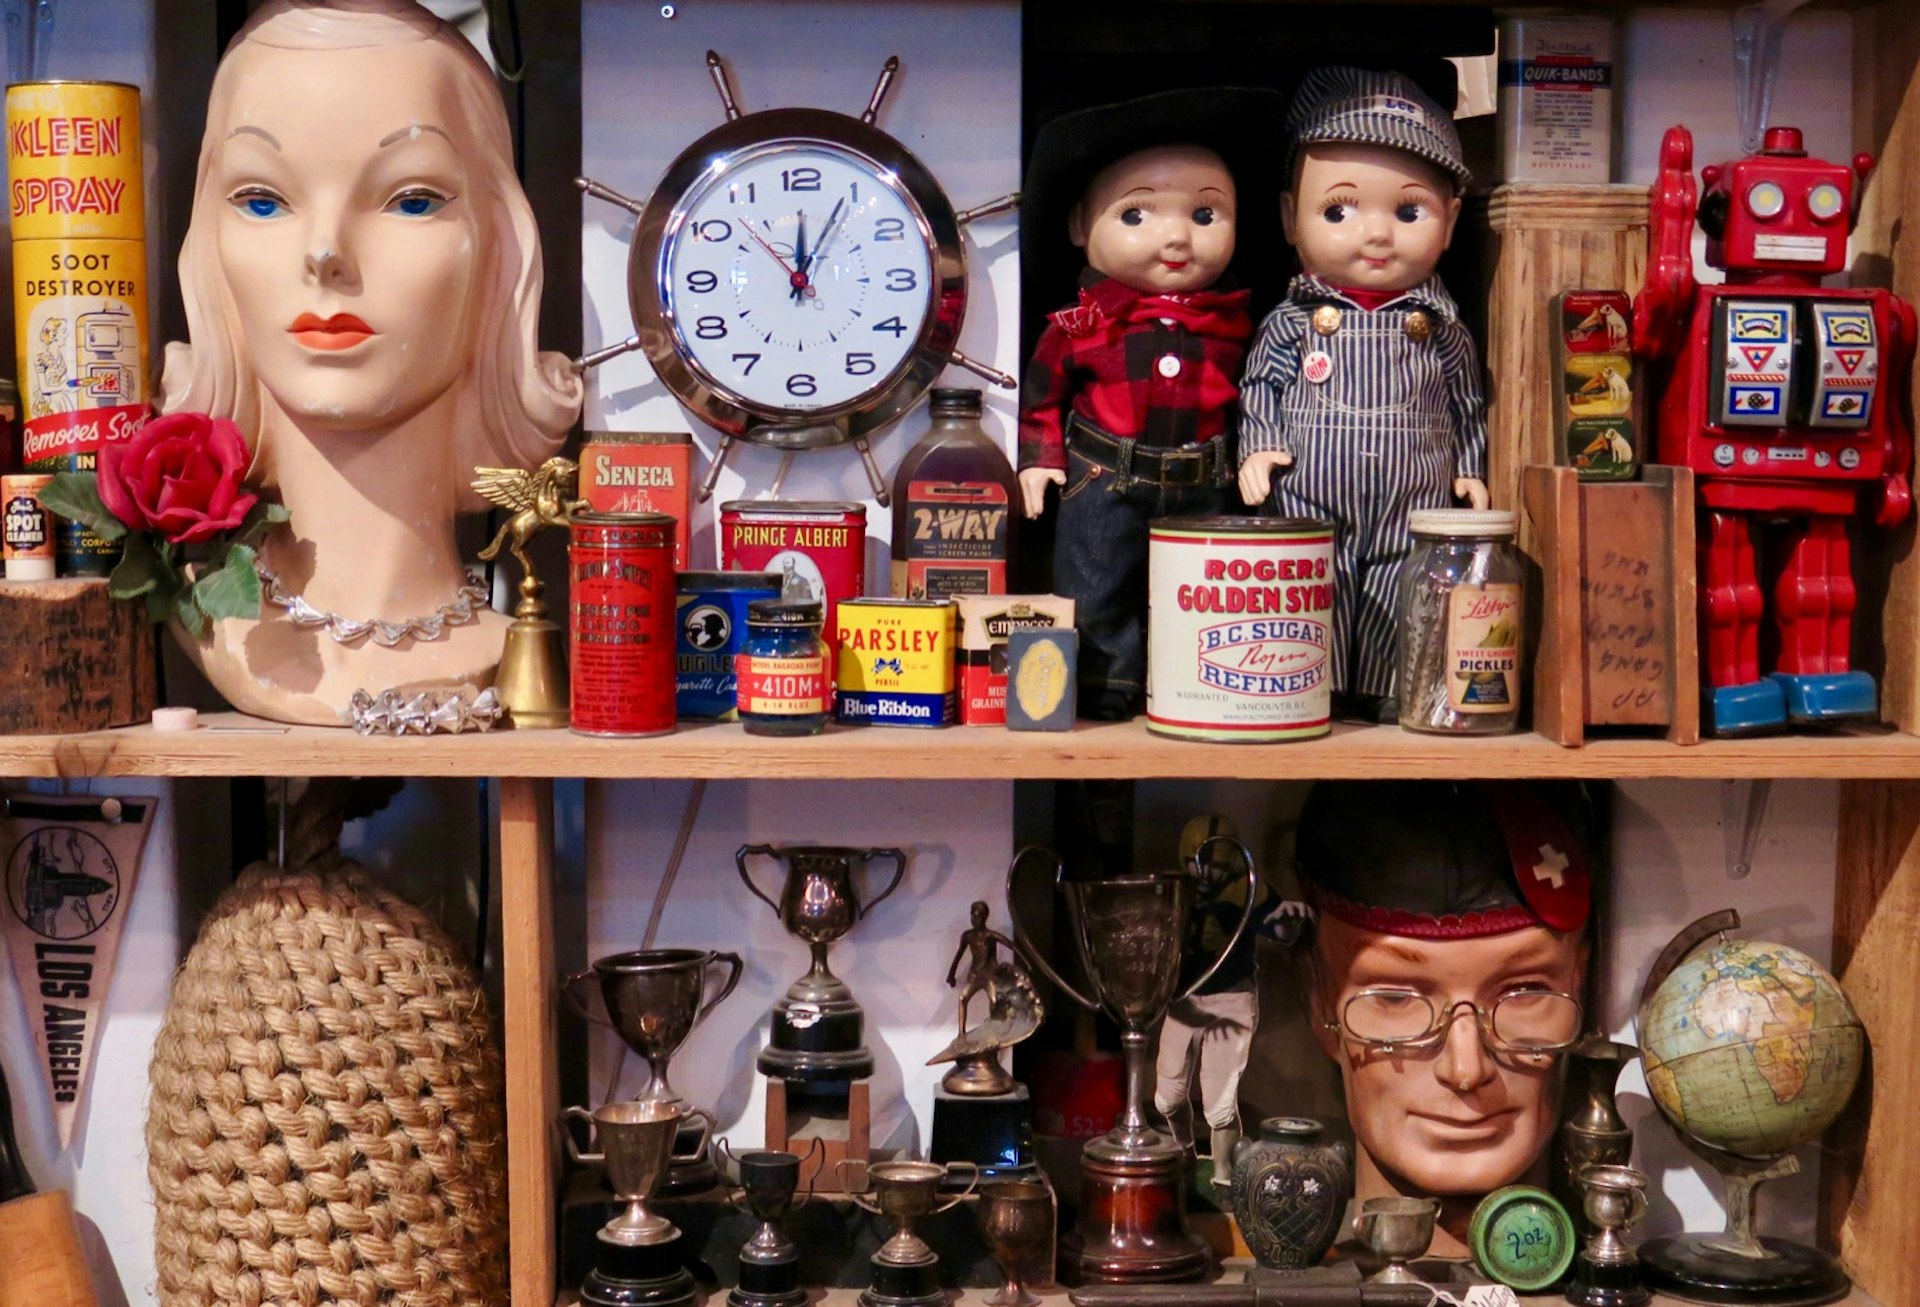 An array of kitschy items, including dolls and a ship's steering wheel clock are seen on shelves in a vintage store